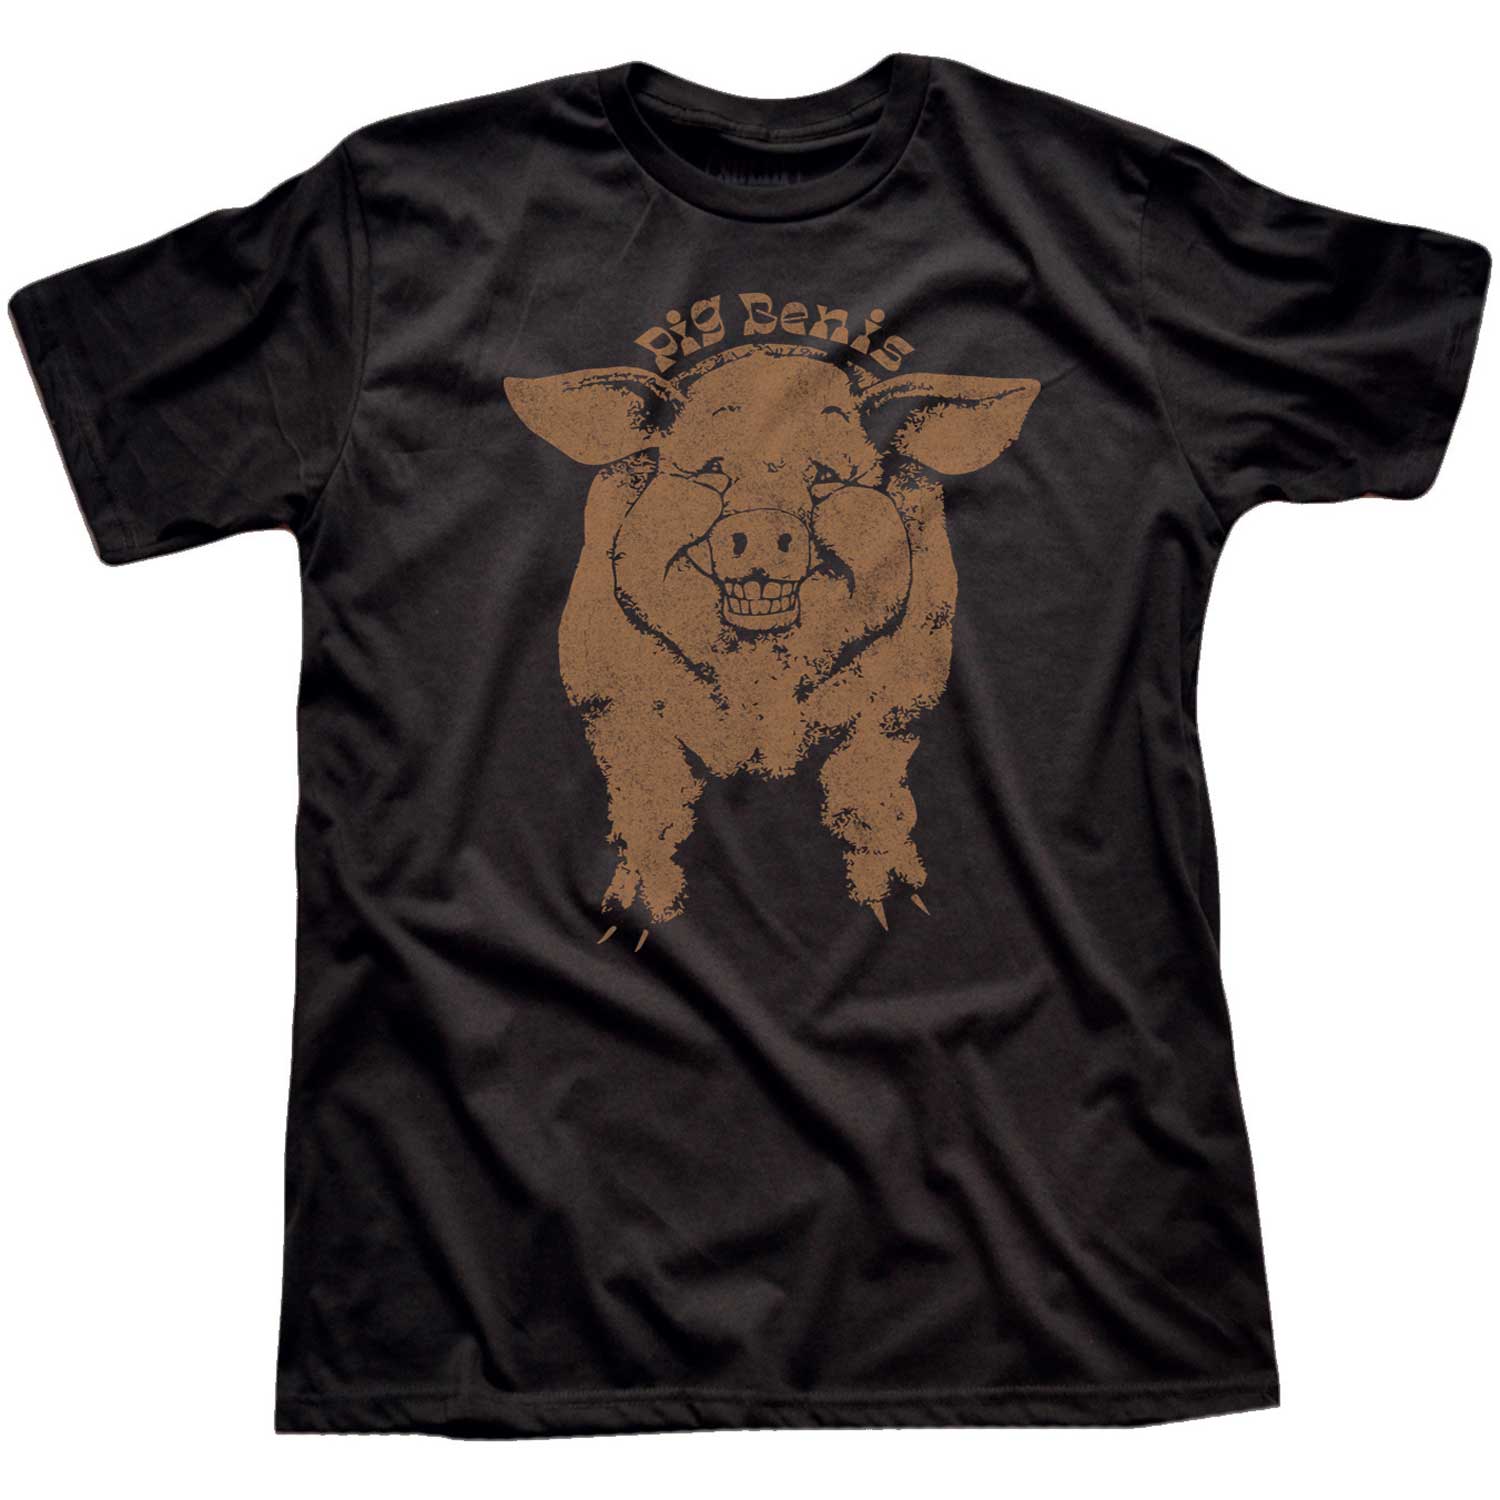 Men's Pig Benis Vintage Raunchy Sex Graphic T-Shirt | Funny Playboy Tee | Solid Threads